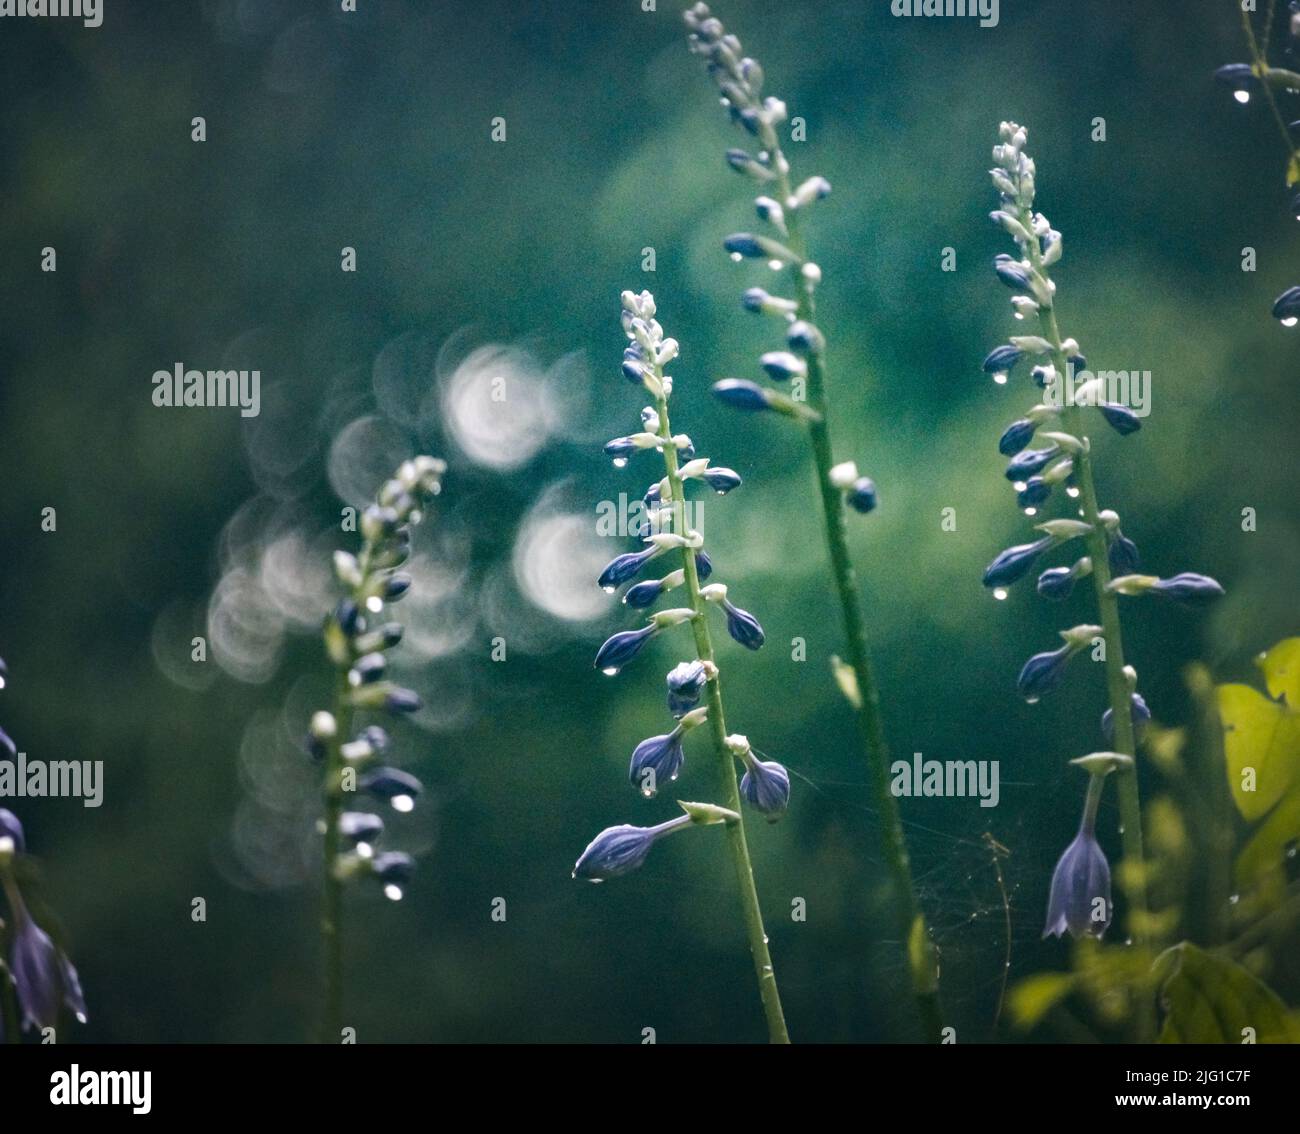 Purple hosta flowers, Funkia, with rain drops on a misty, lush background in spring or summer, Lancaster, Pennsylvania Stock Photo